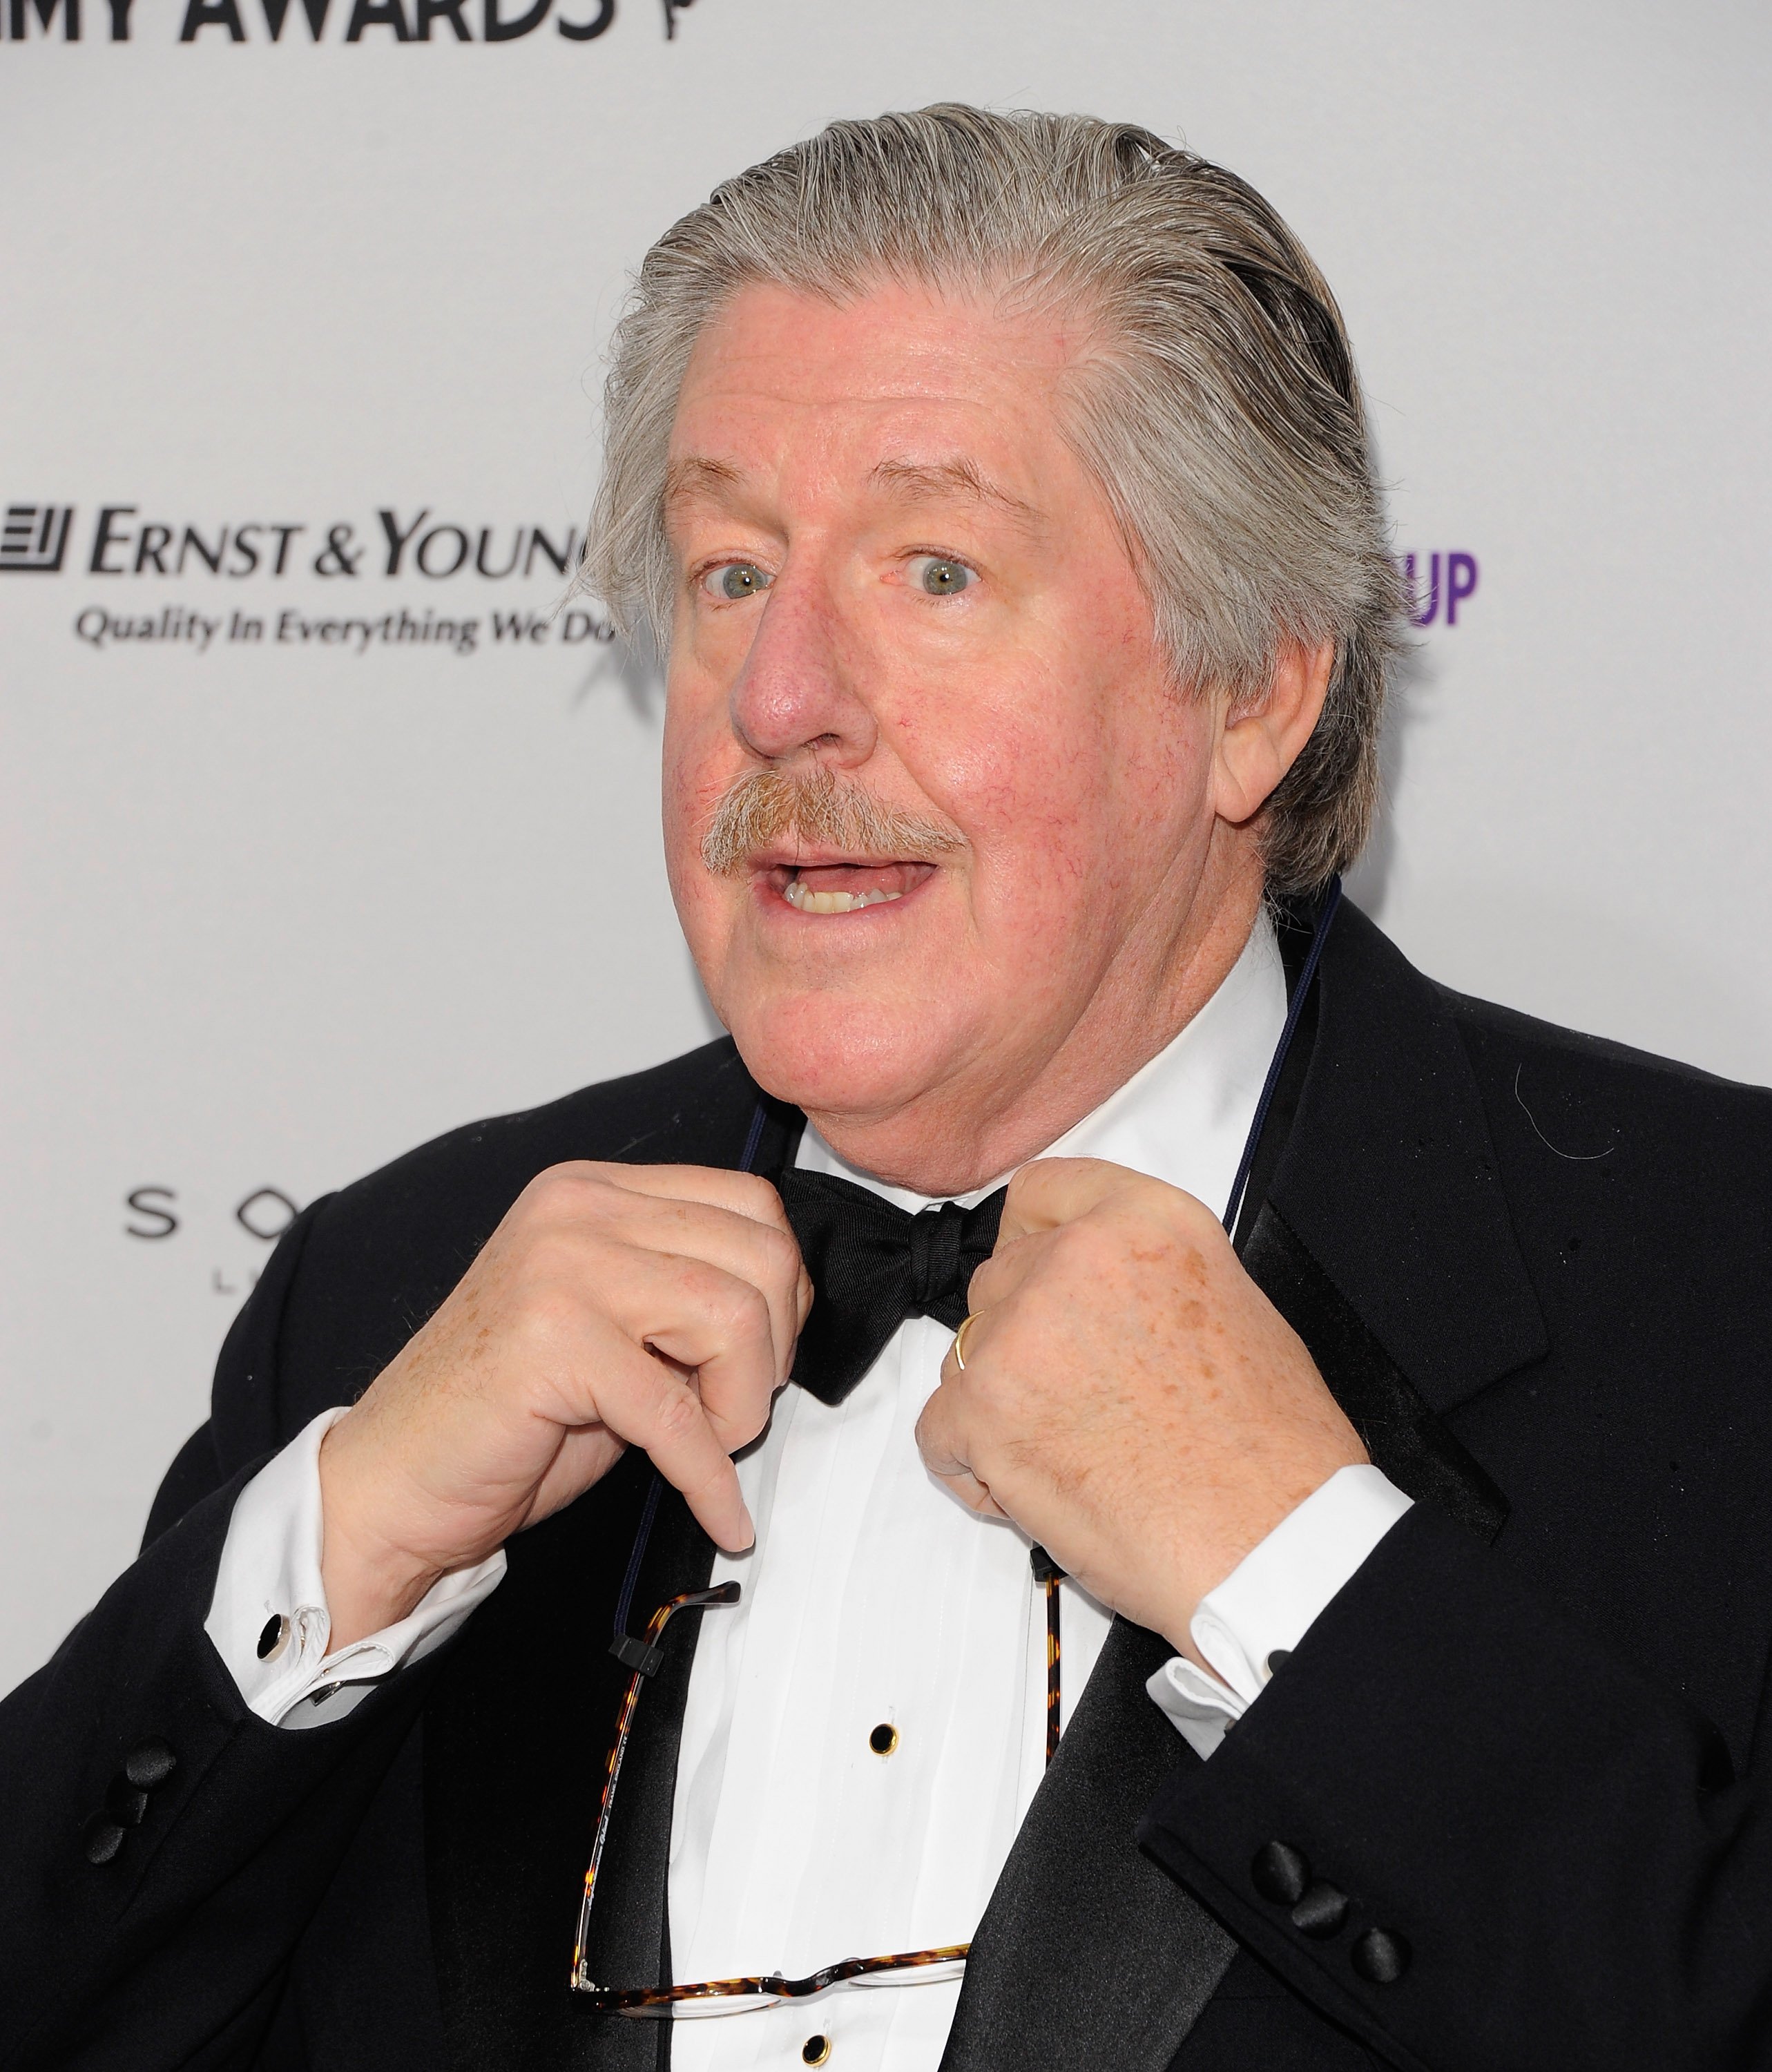 Edward Herrmann adjusts his bowtie during the 39th International Emmy Awards in 2011